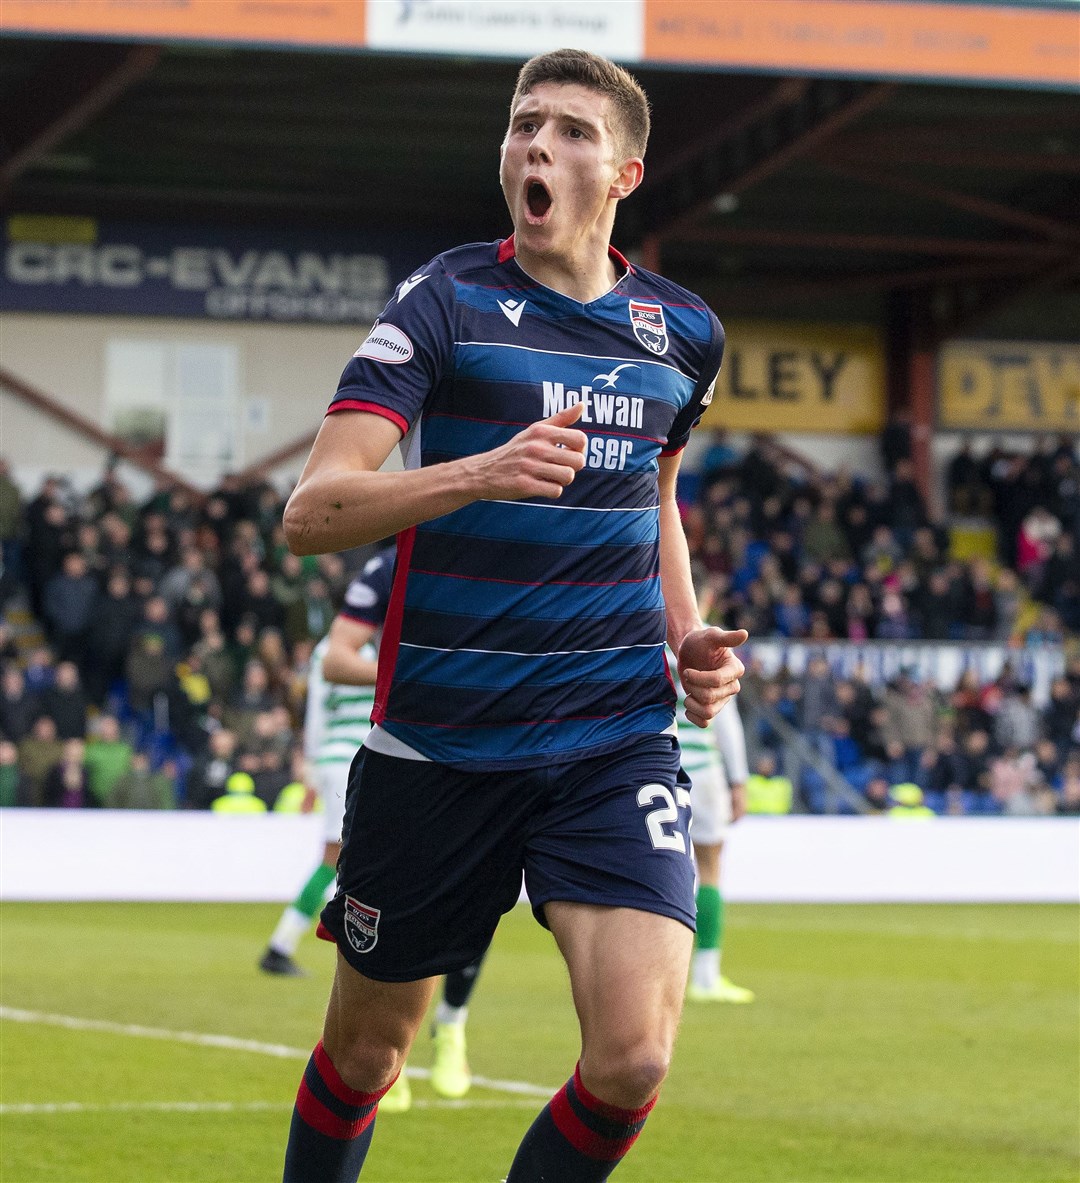 Picture - Ken Macpherson, Inverness. Ross County(1) v Celtic(4). 01.12.19. Ross County's Ross Stewart celebrates after heading past Celtic 'keeper Fraser Forster to level the game at 1-1.